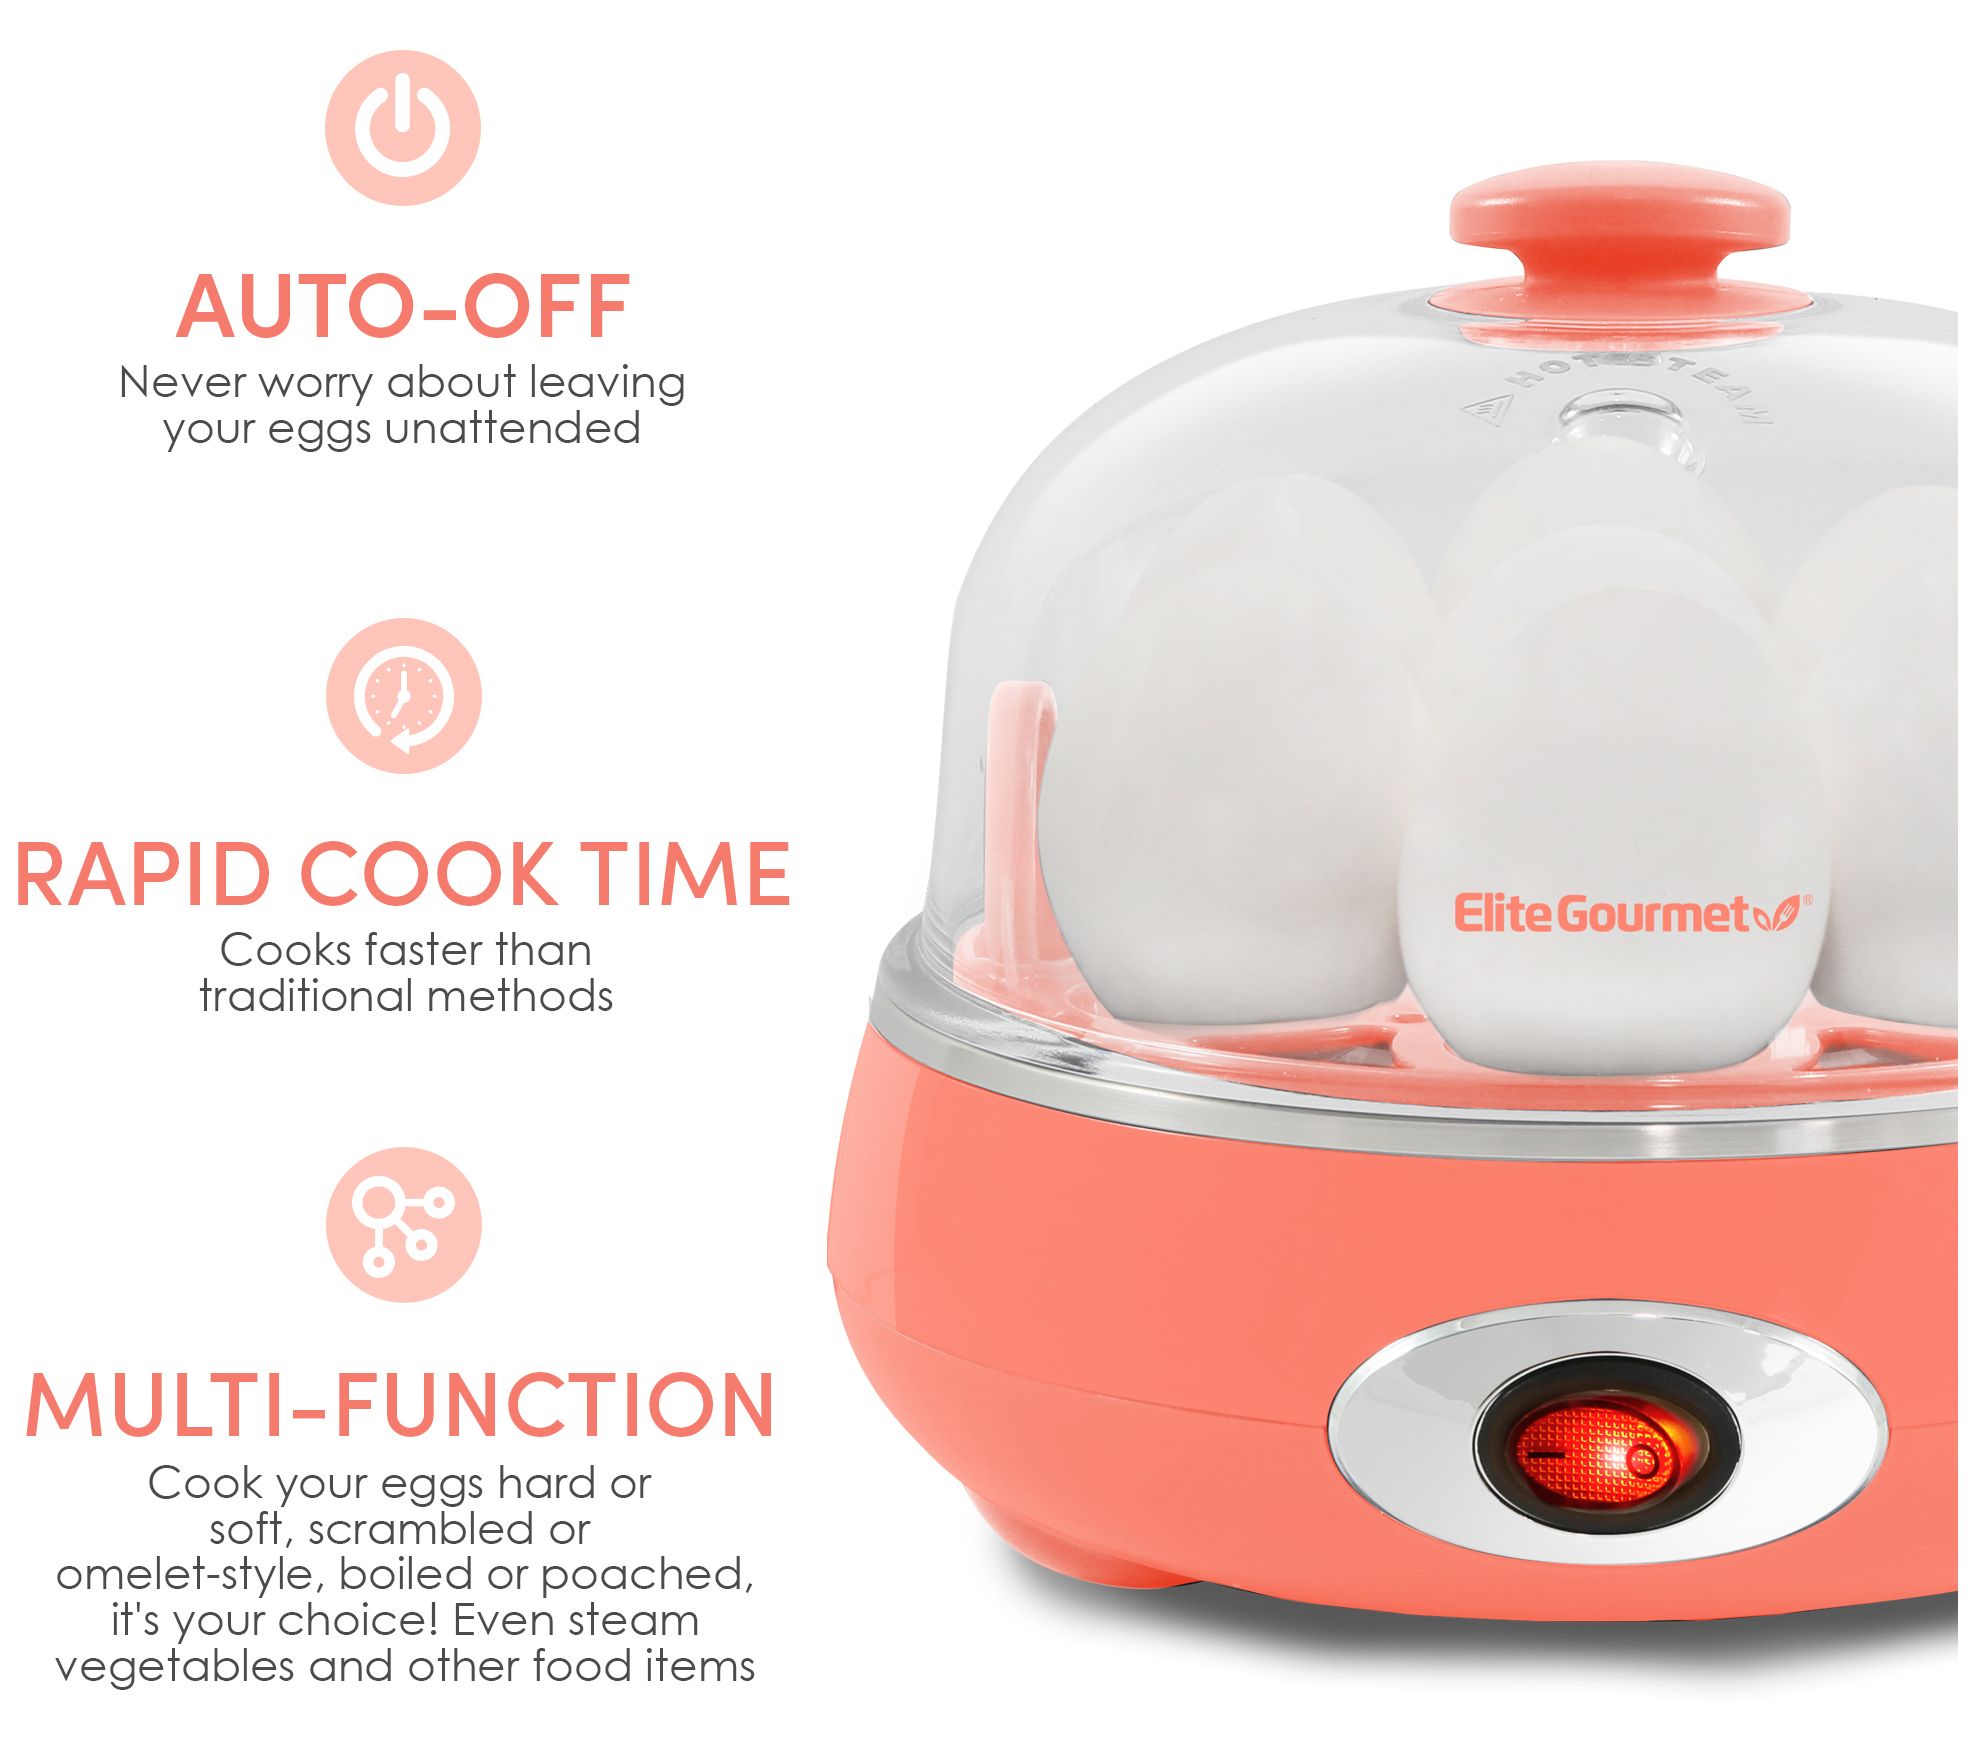 The Top-Rated Elite Gourmet Egg Cooker Is 50% Off on